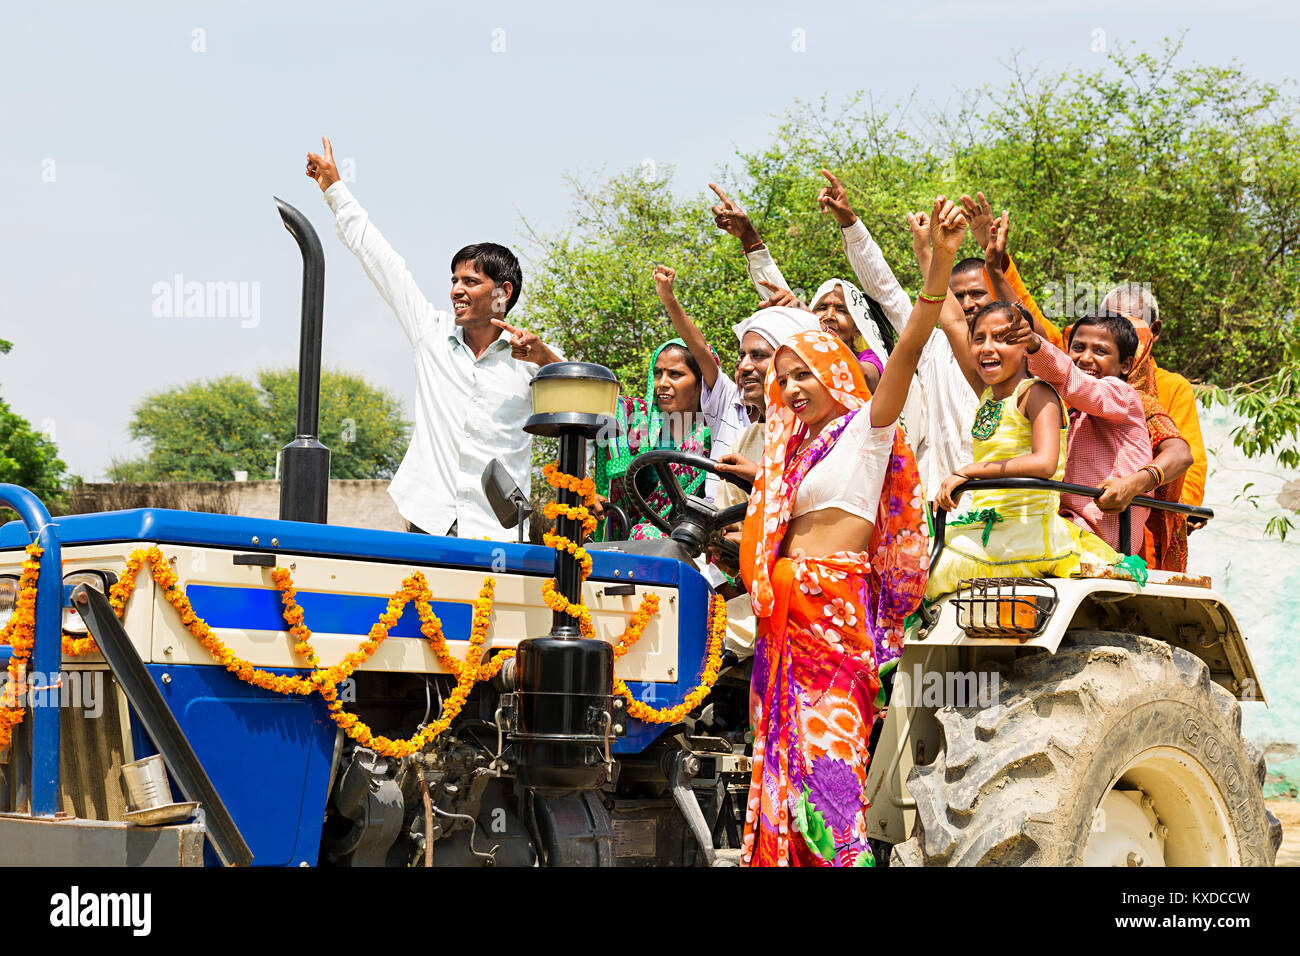 Indian Groups Rural Farmer Family RideTractor Cheerful Rural Village Stock Photo